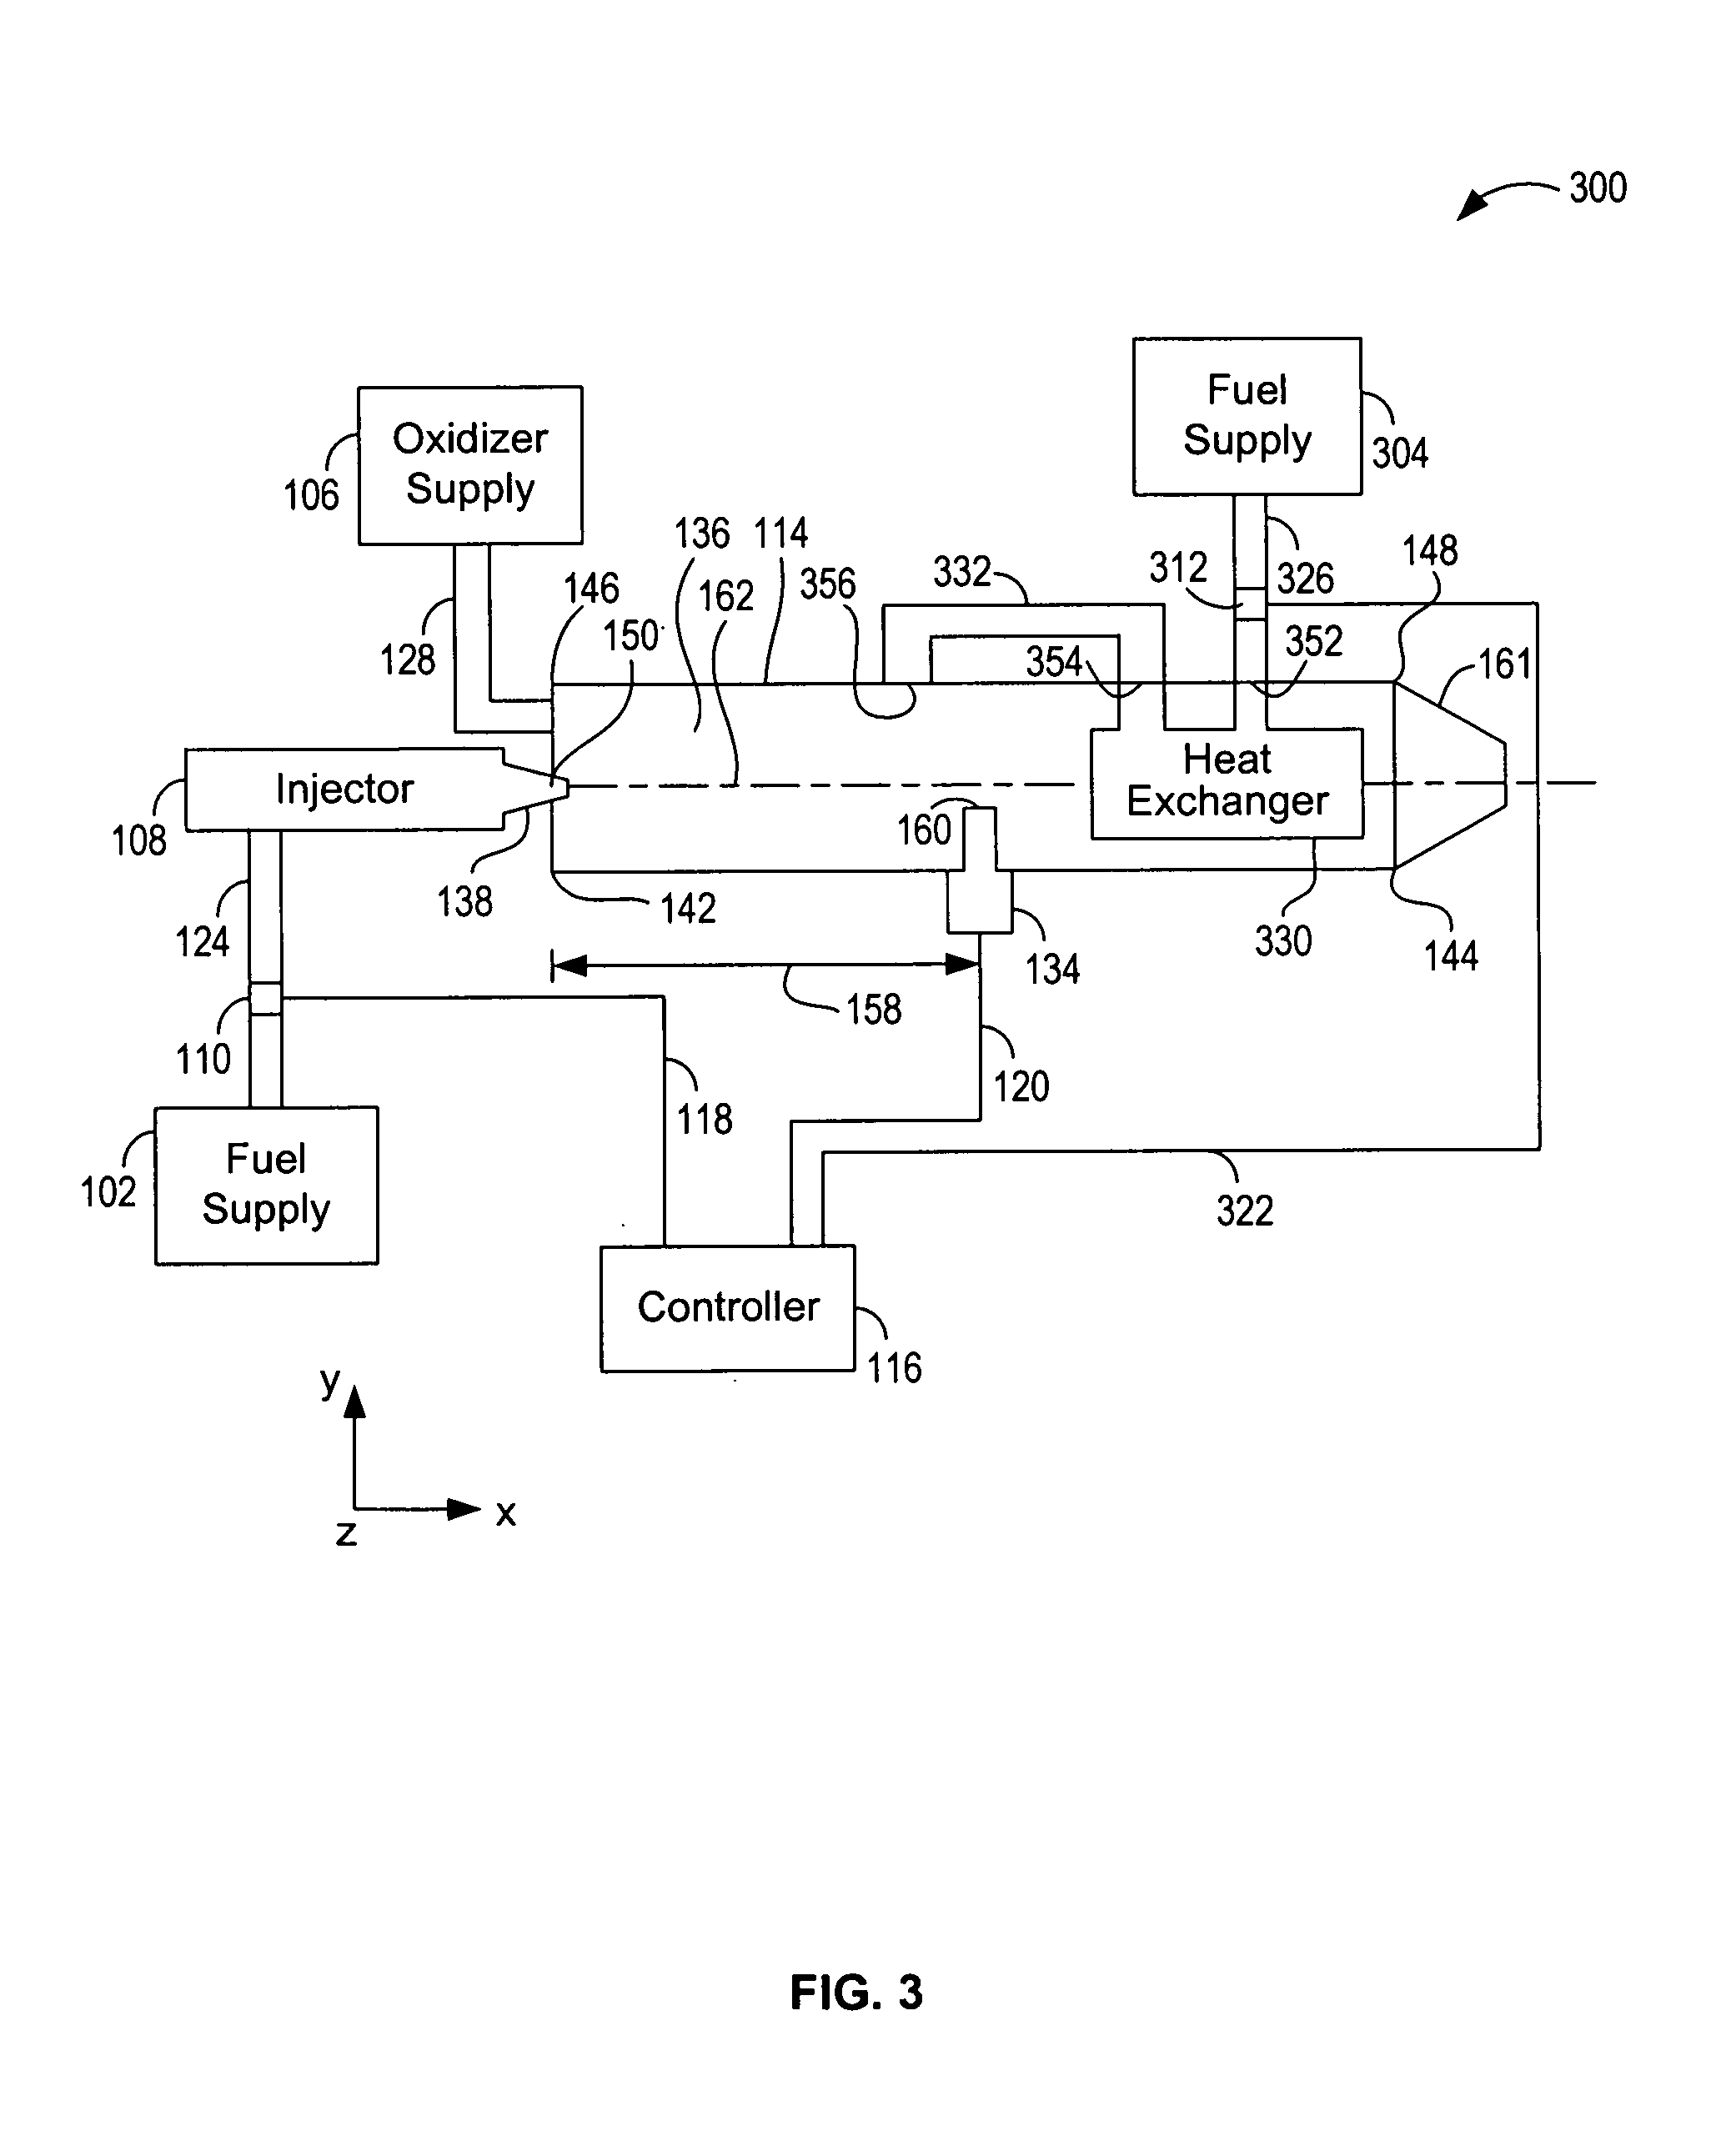 Direct liquid fuel injection and ignition for a pulse detonation combustor